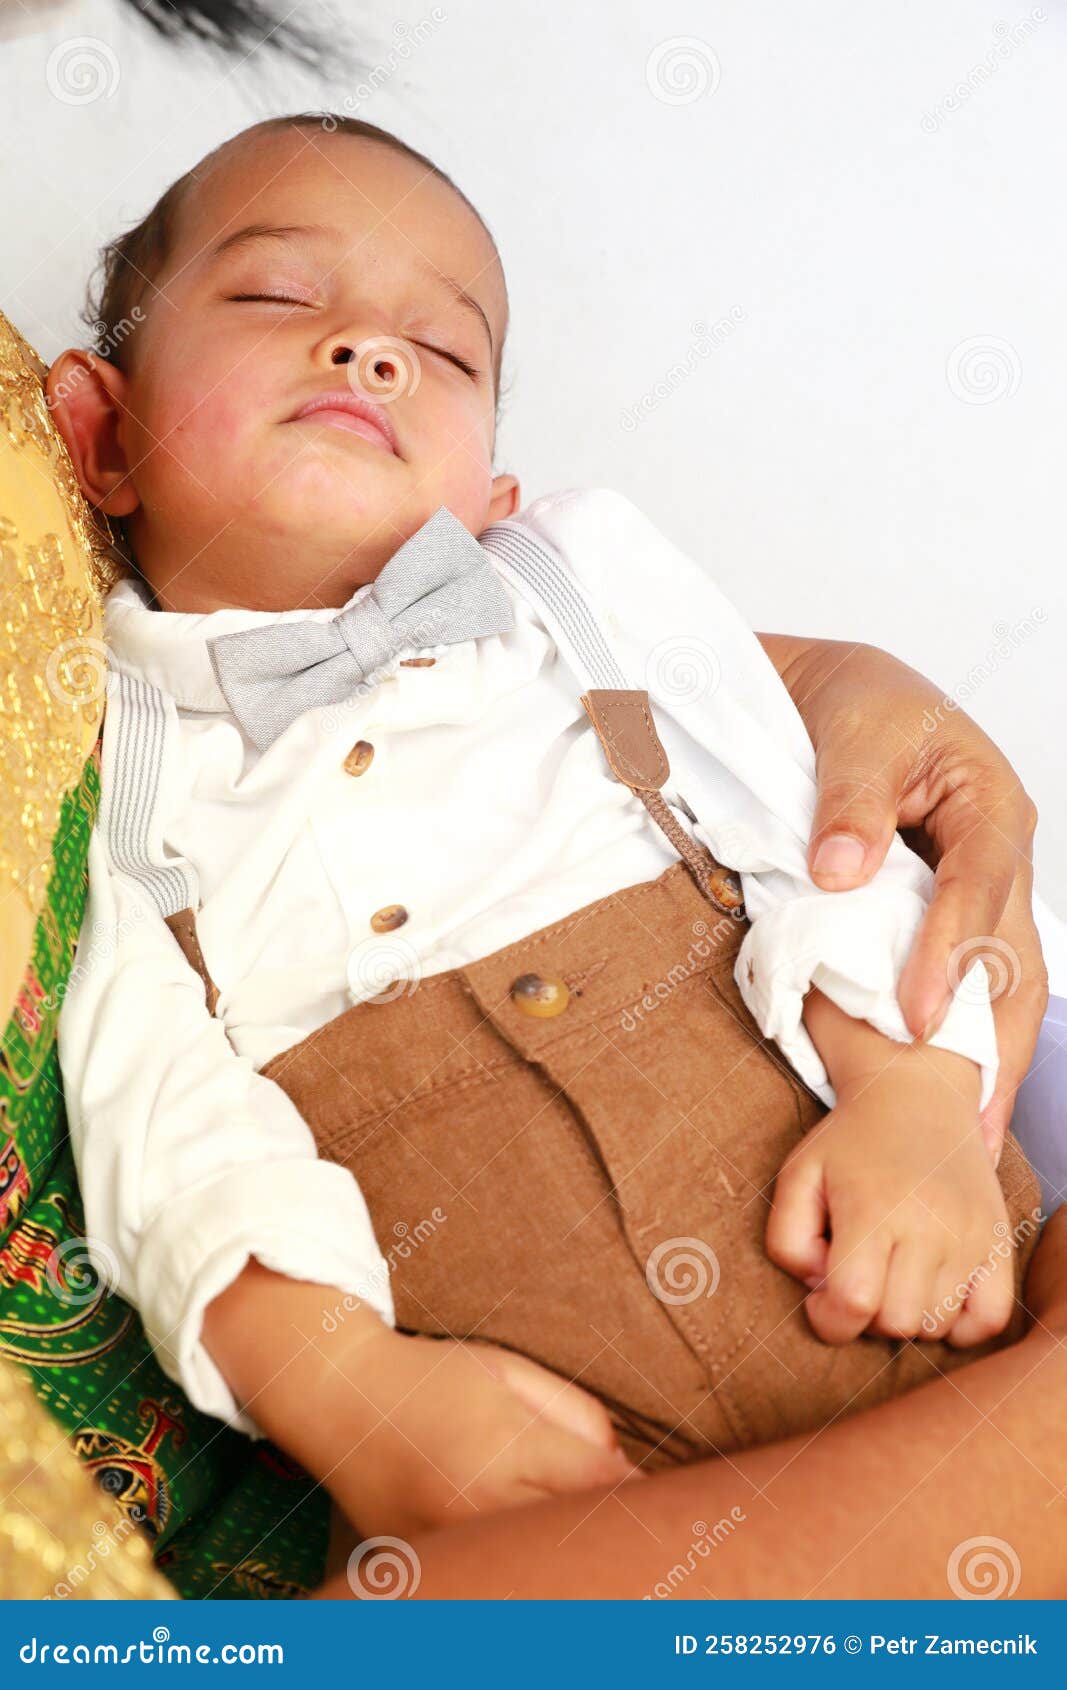 Baby, lie, caps, fingers, half portrait suck child, small, 6-10 months,  infant, plastic pants, back position, brightly, reach, feet play, interest,  inside, curled, conception, development, childhood, innocence, cheerfulness  Stock Photo - Alamy